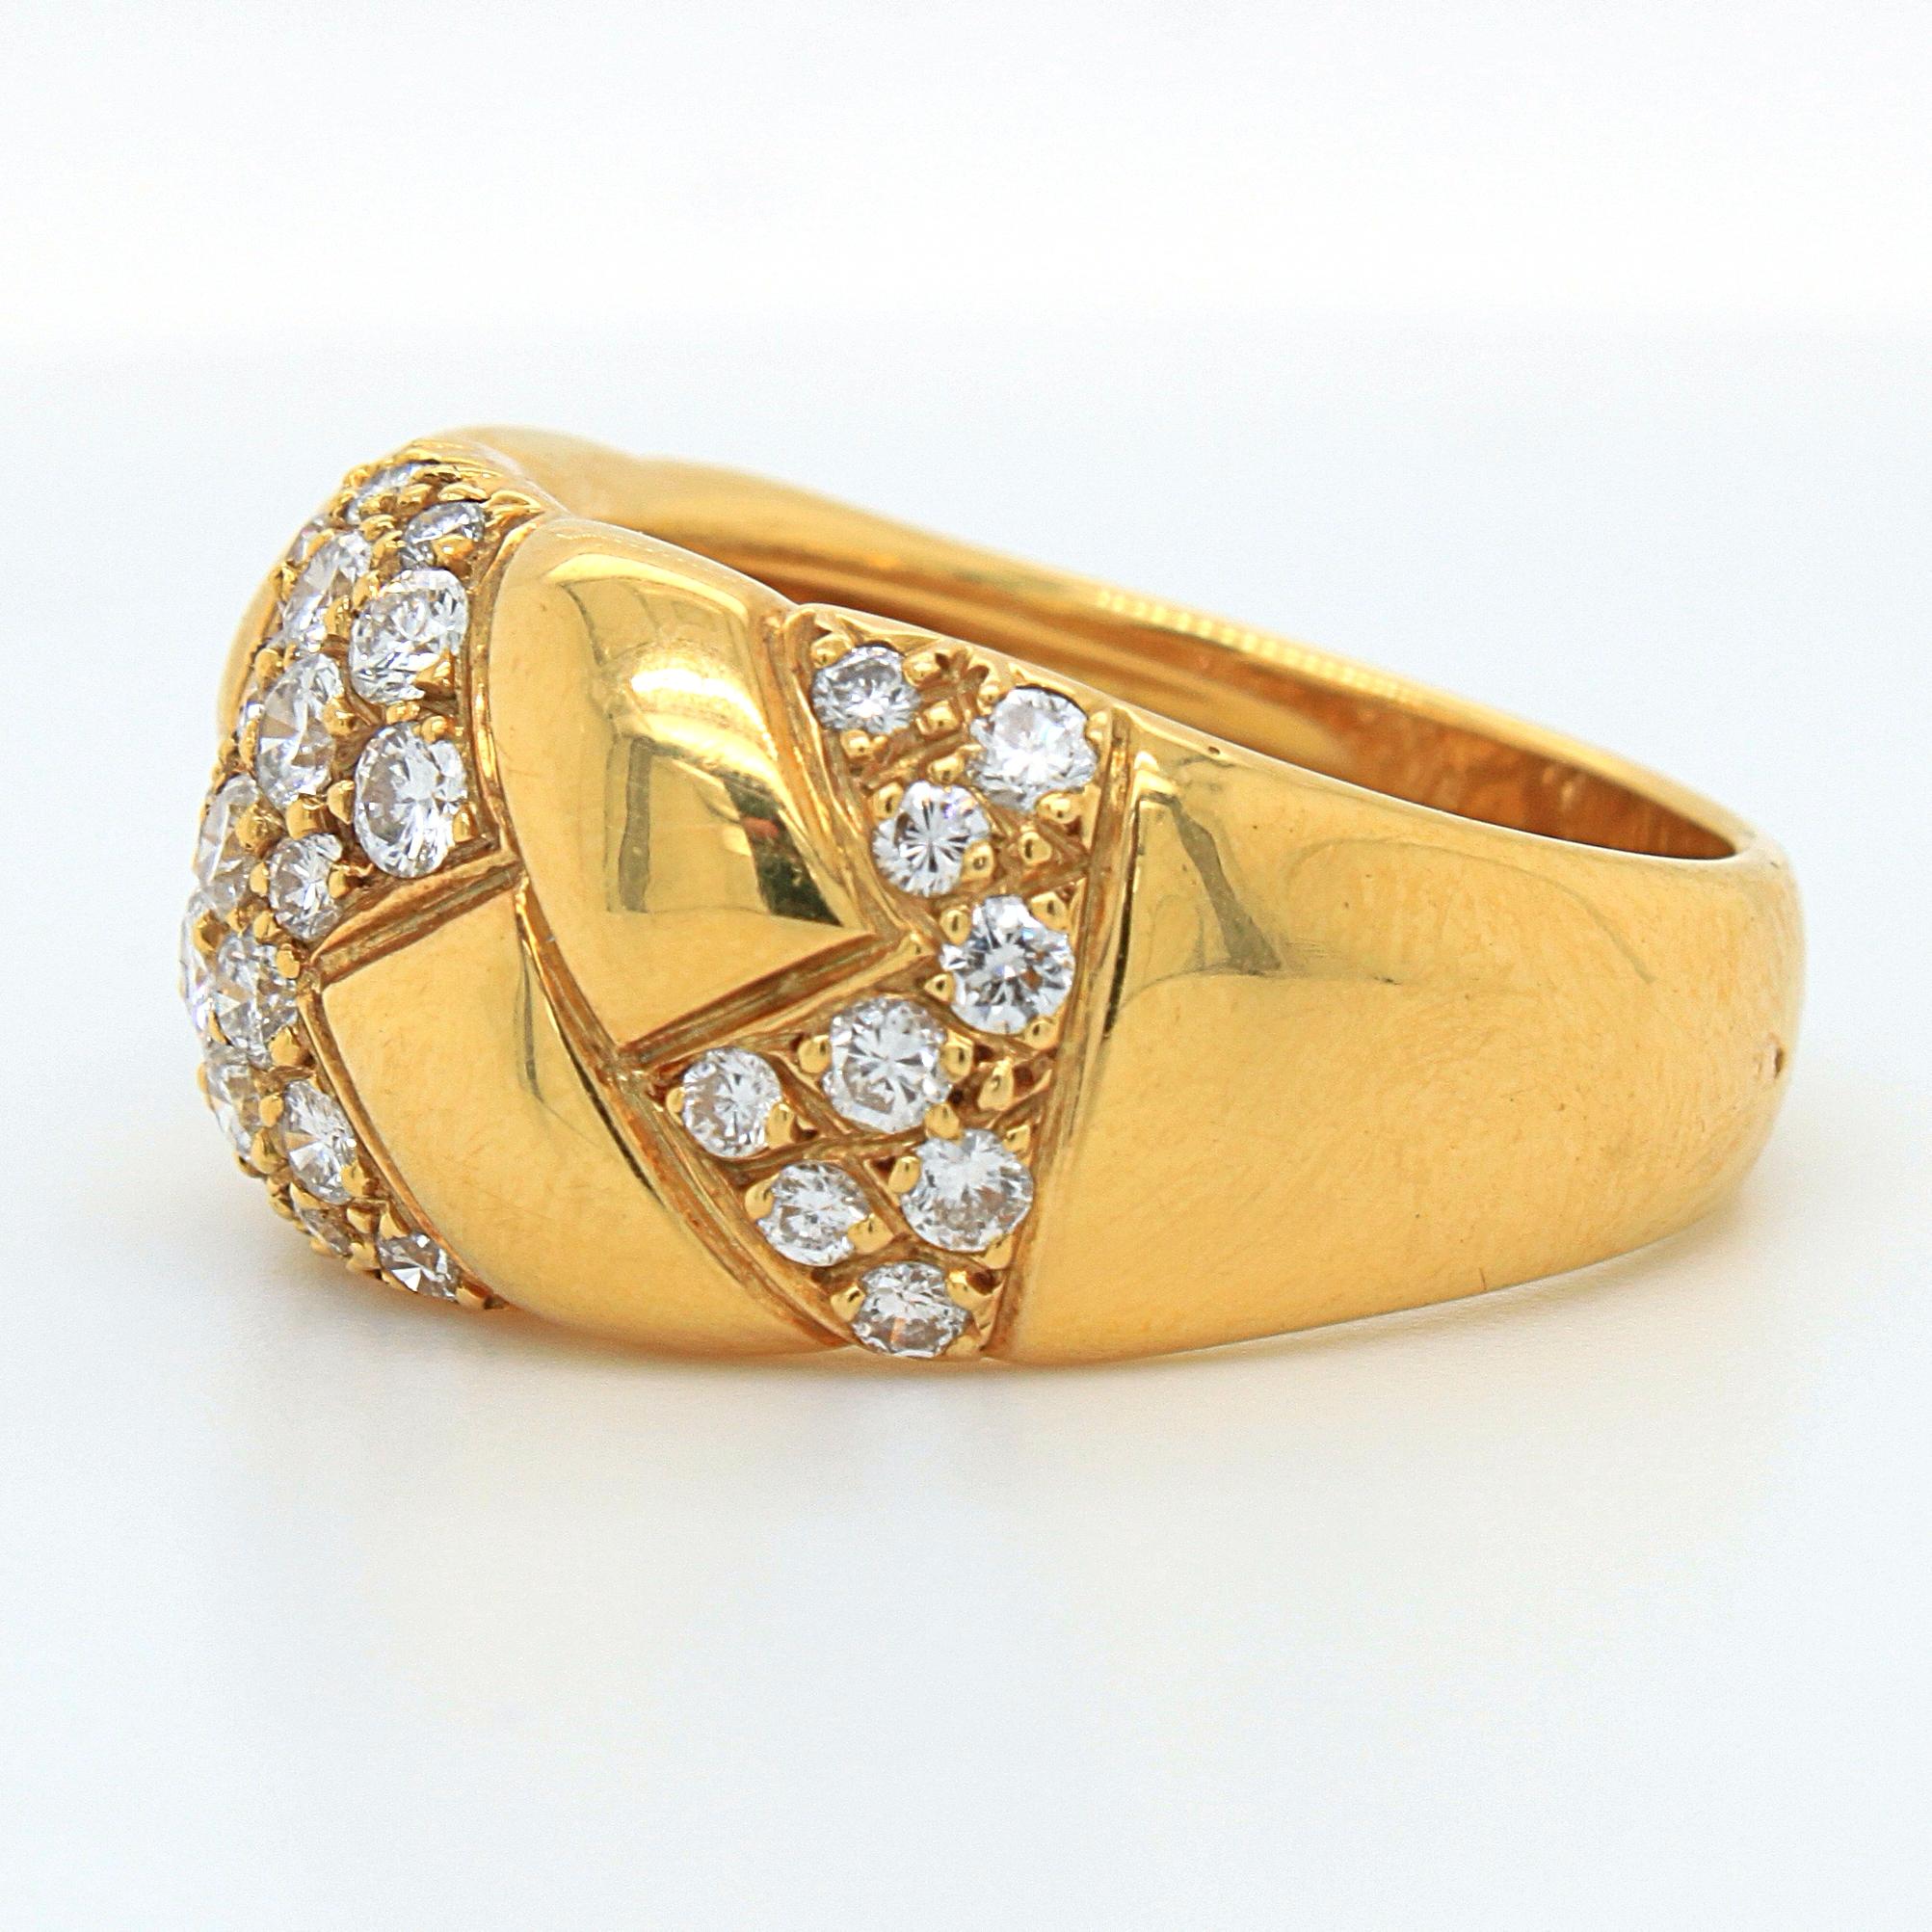 Women's Diamond and 18k Yellow Gold Ring, France, 20th Century